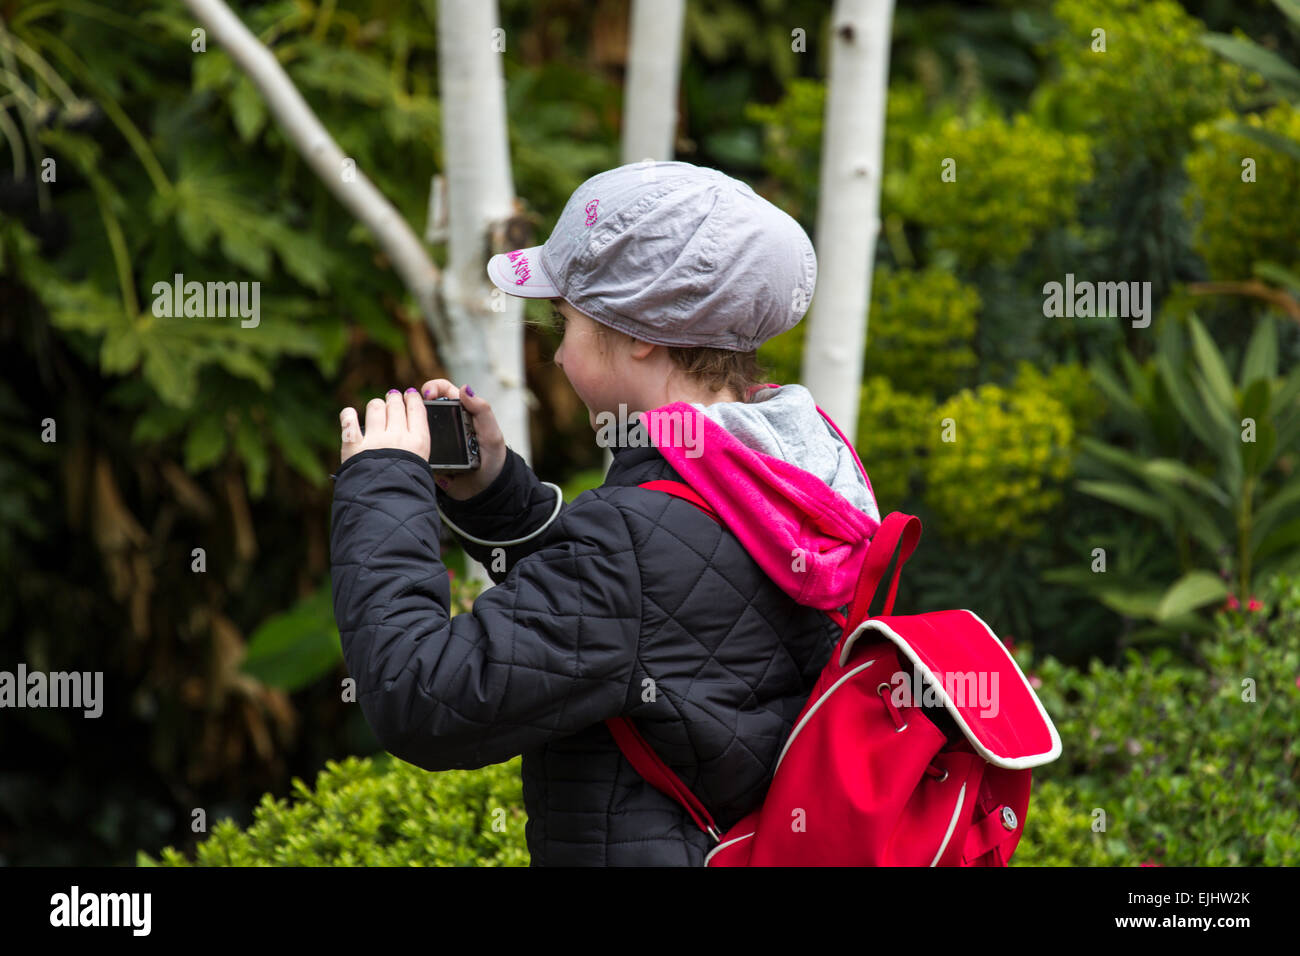 Young girl taking photos in St. James's Park, London, England Stock Photo